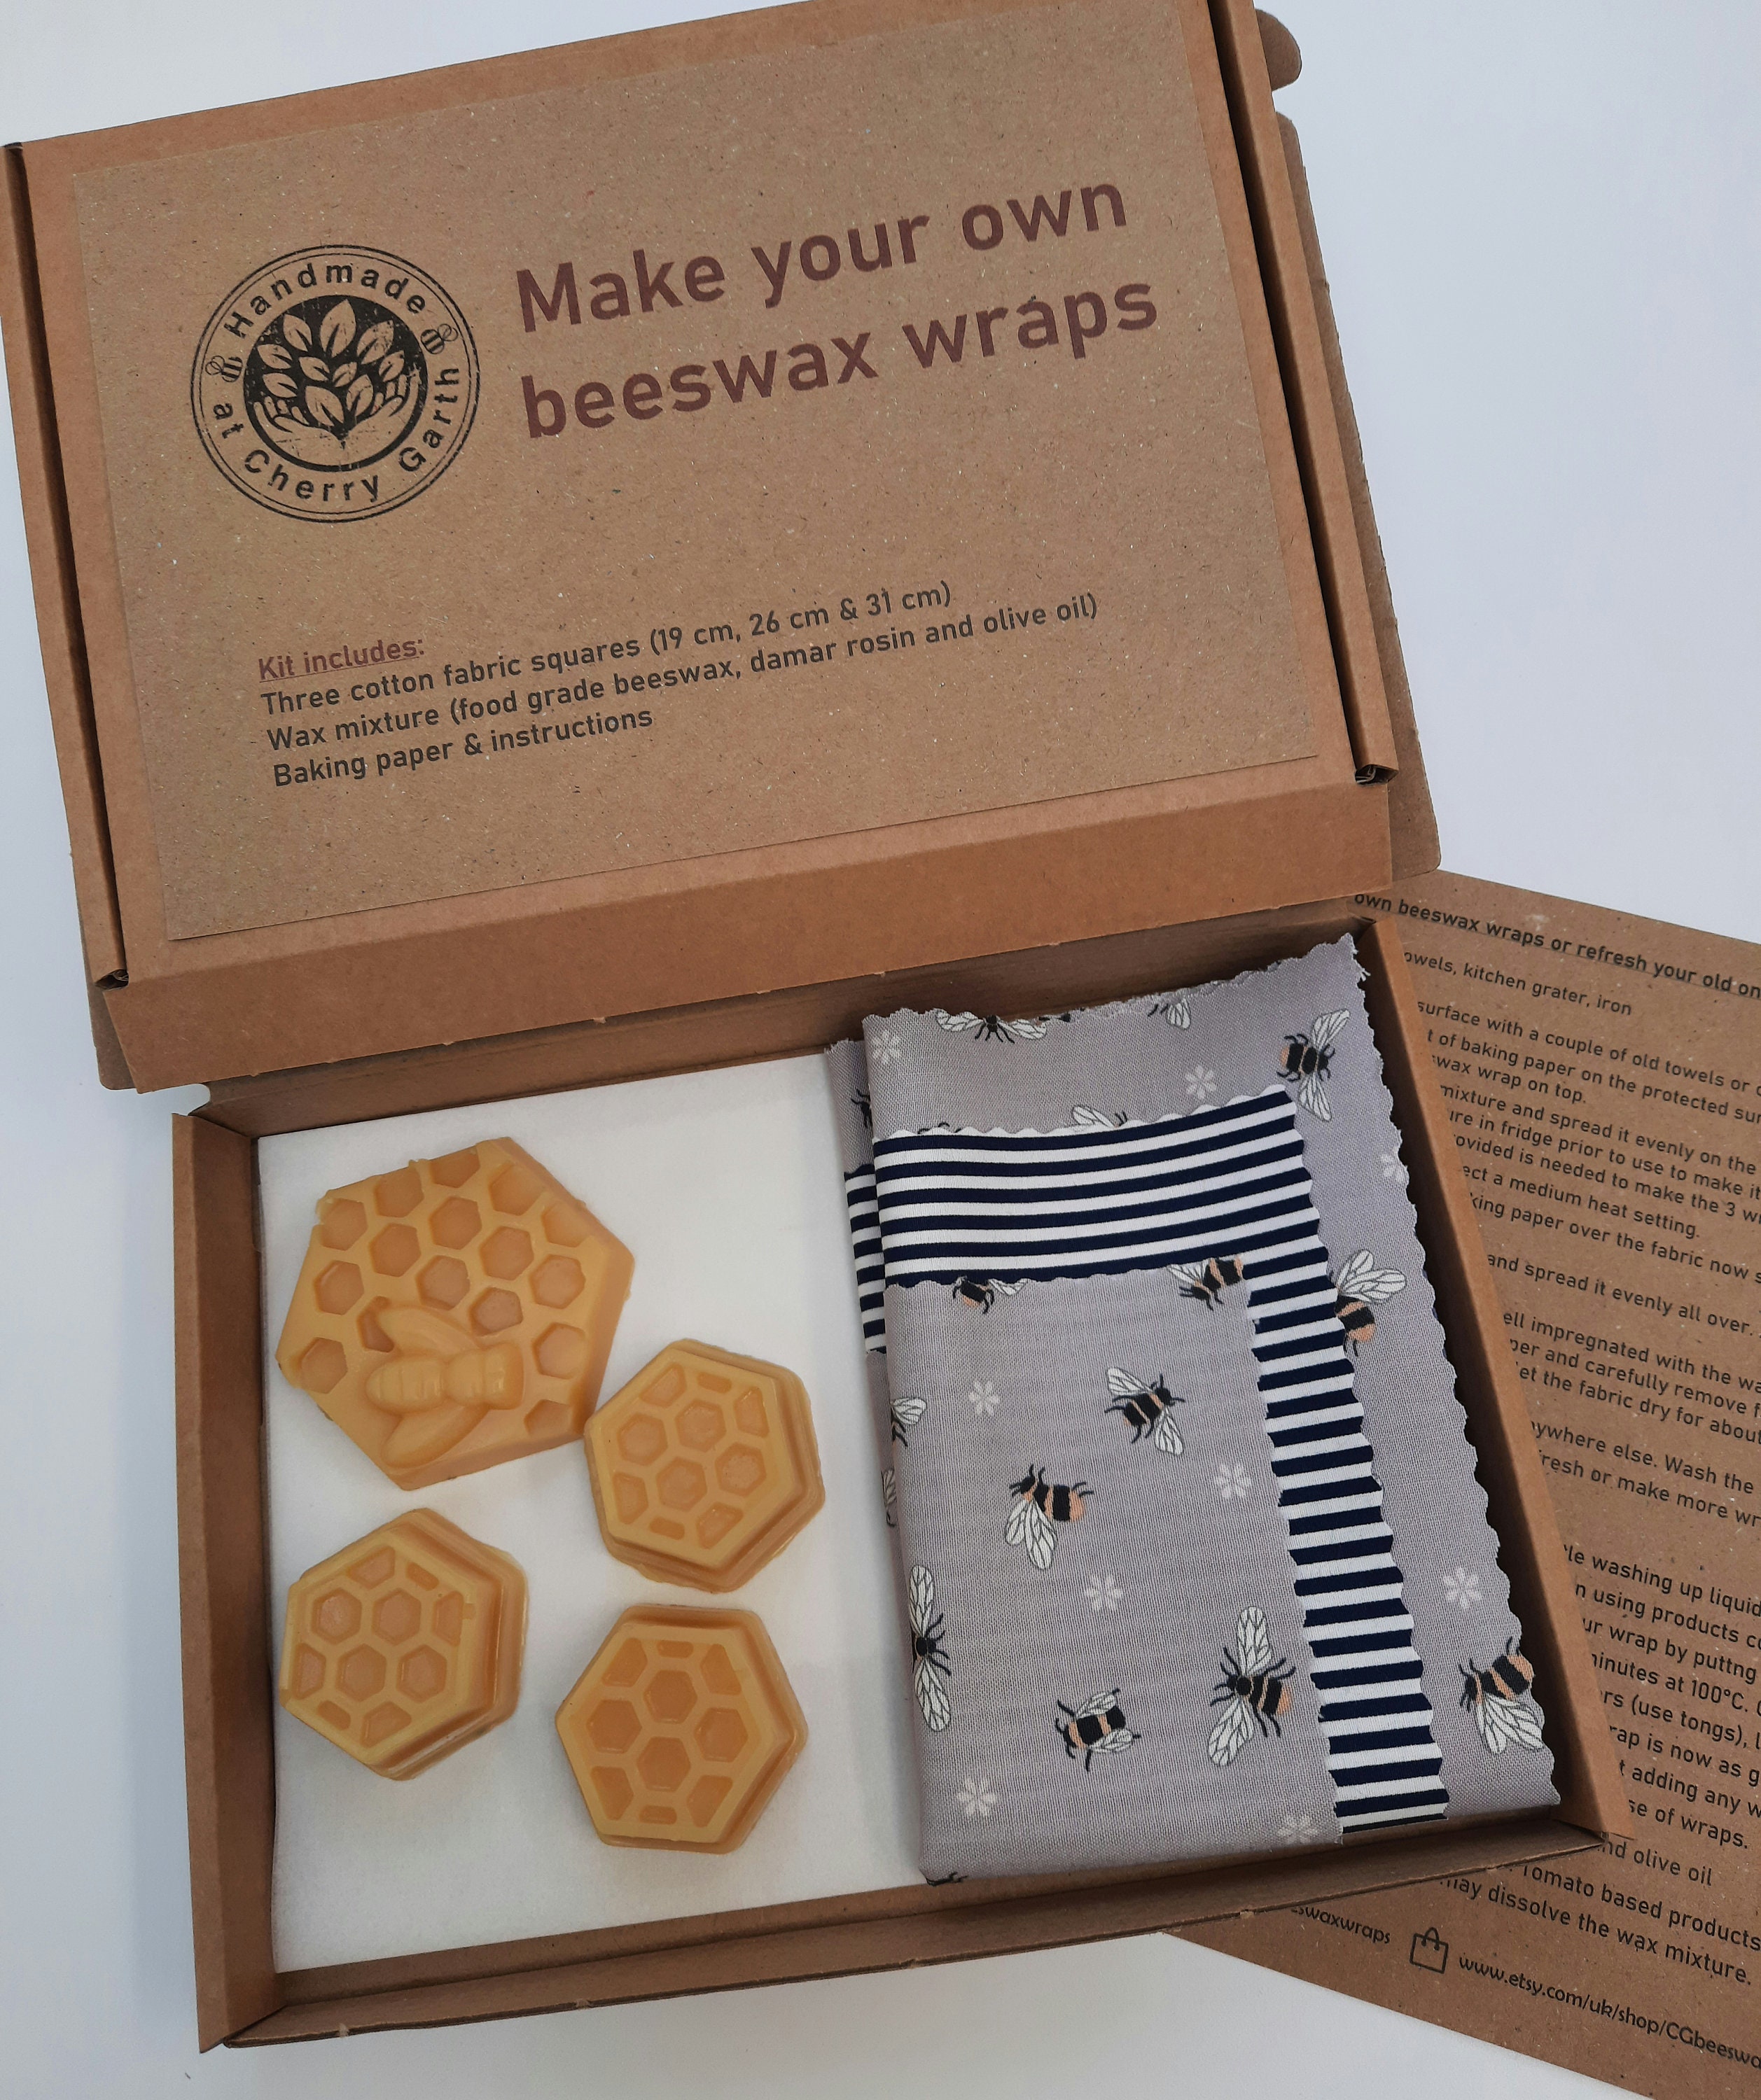 DIY Beeswax Wrap Kit Make Your Own Set of 3 or 4 Reusable Beeswax Wraps  bees, Flowers, Cats and More Designs -  Sweden